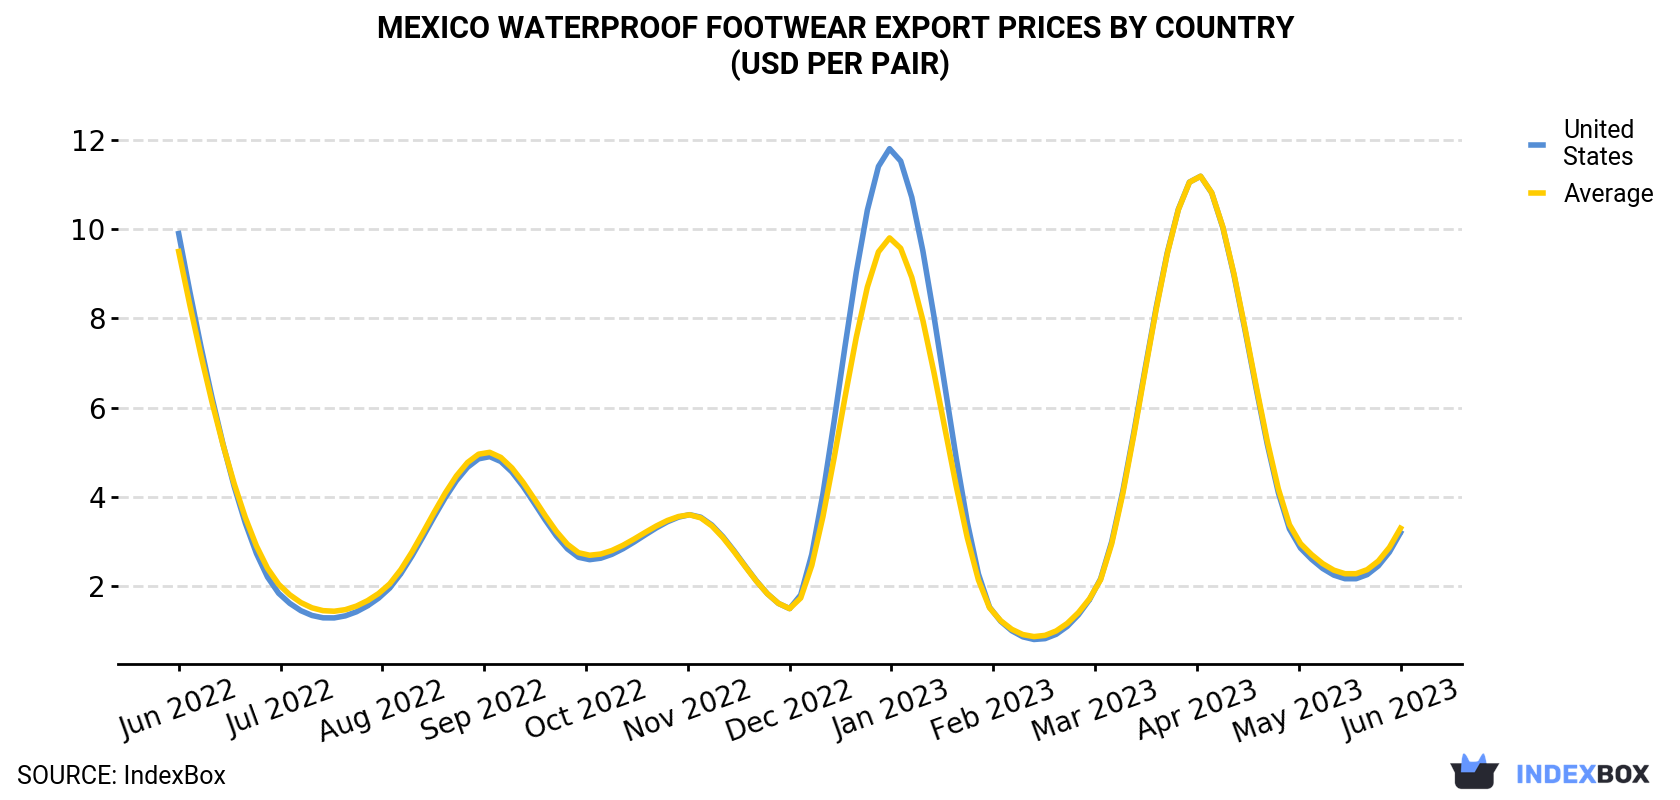 Mexico Waterproof Footwear Export Prices By Country (USD Per Pair)